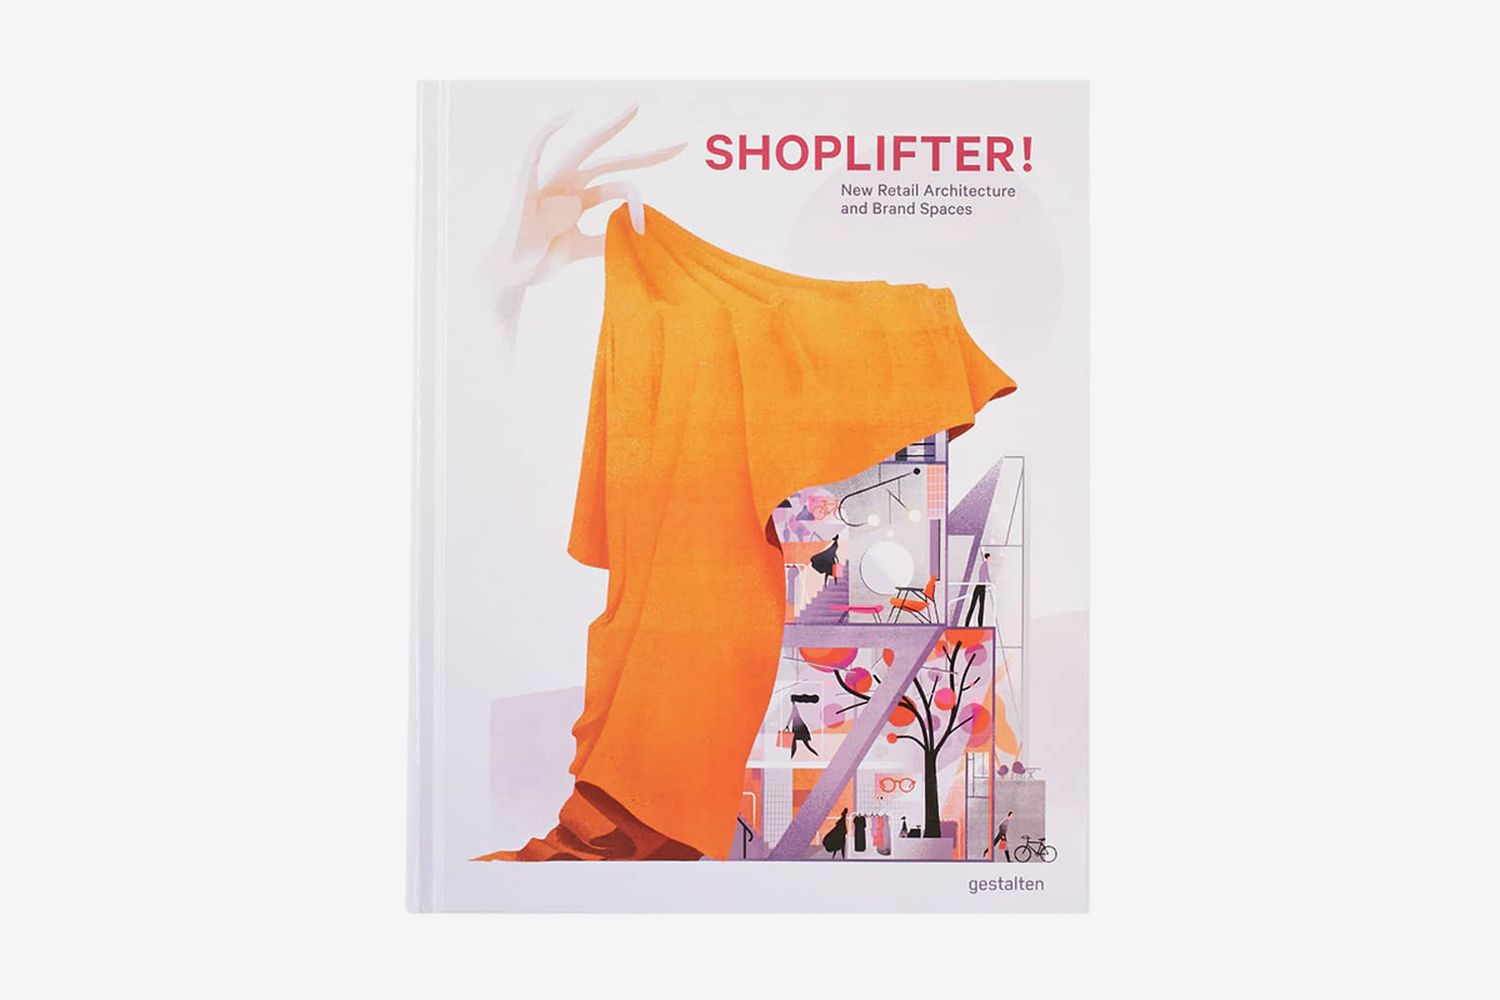 Shoplifters: New Retail Architecture & Brand Spaces